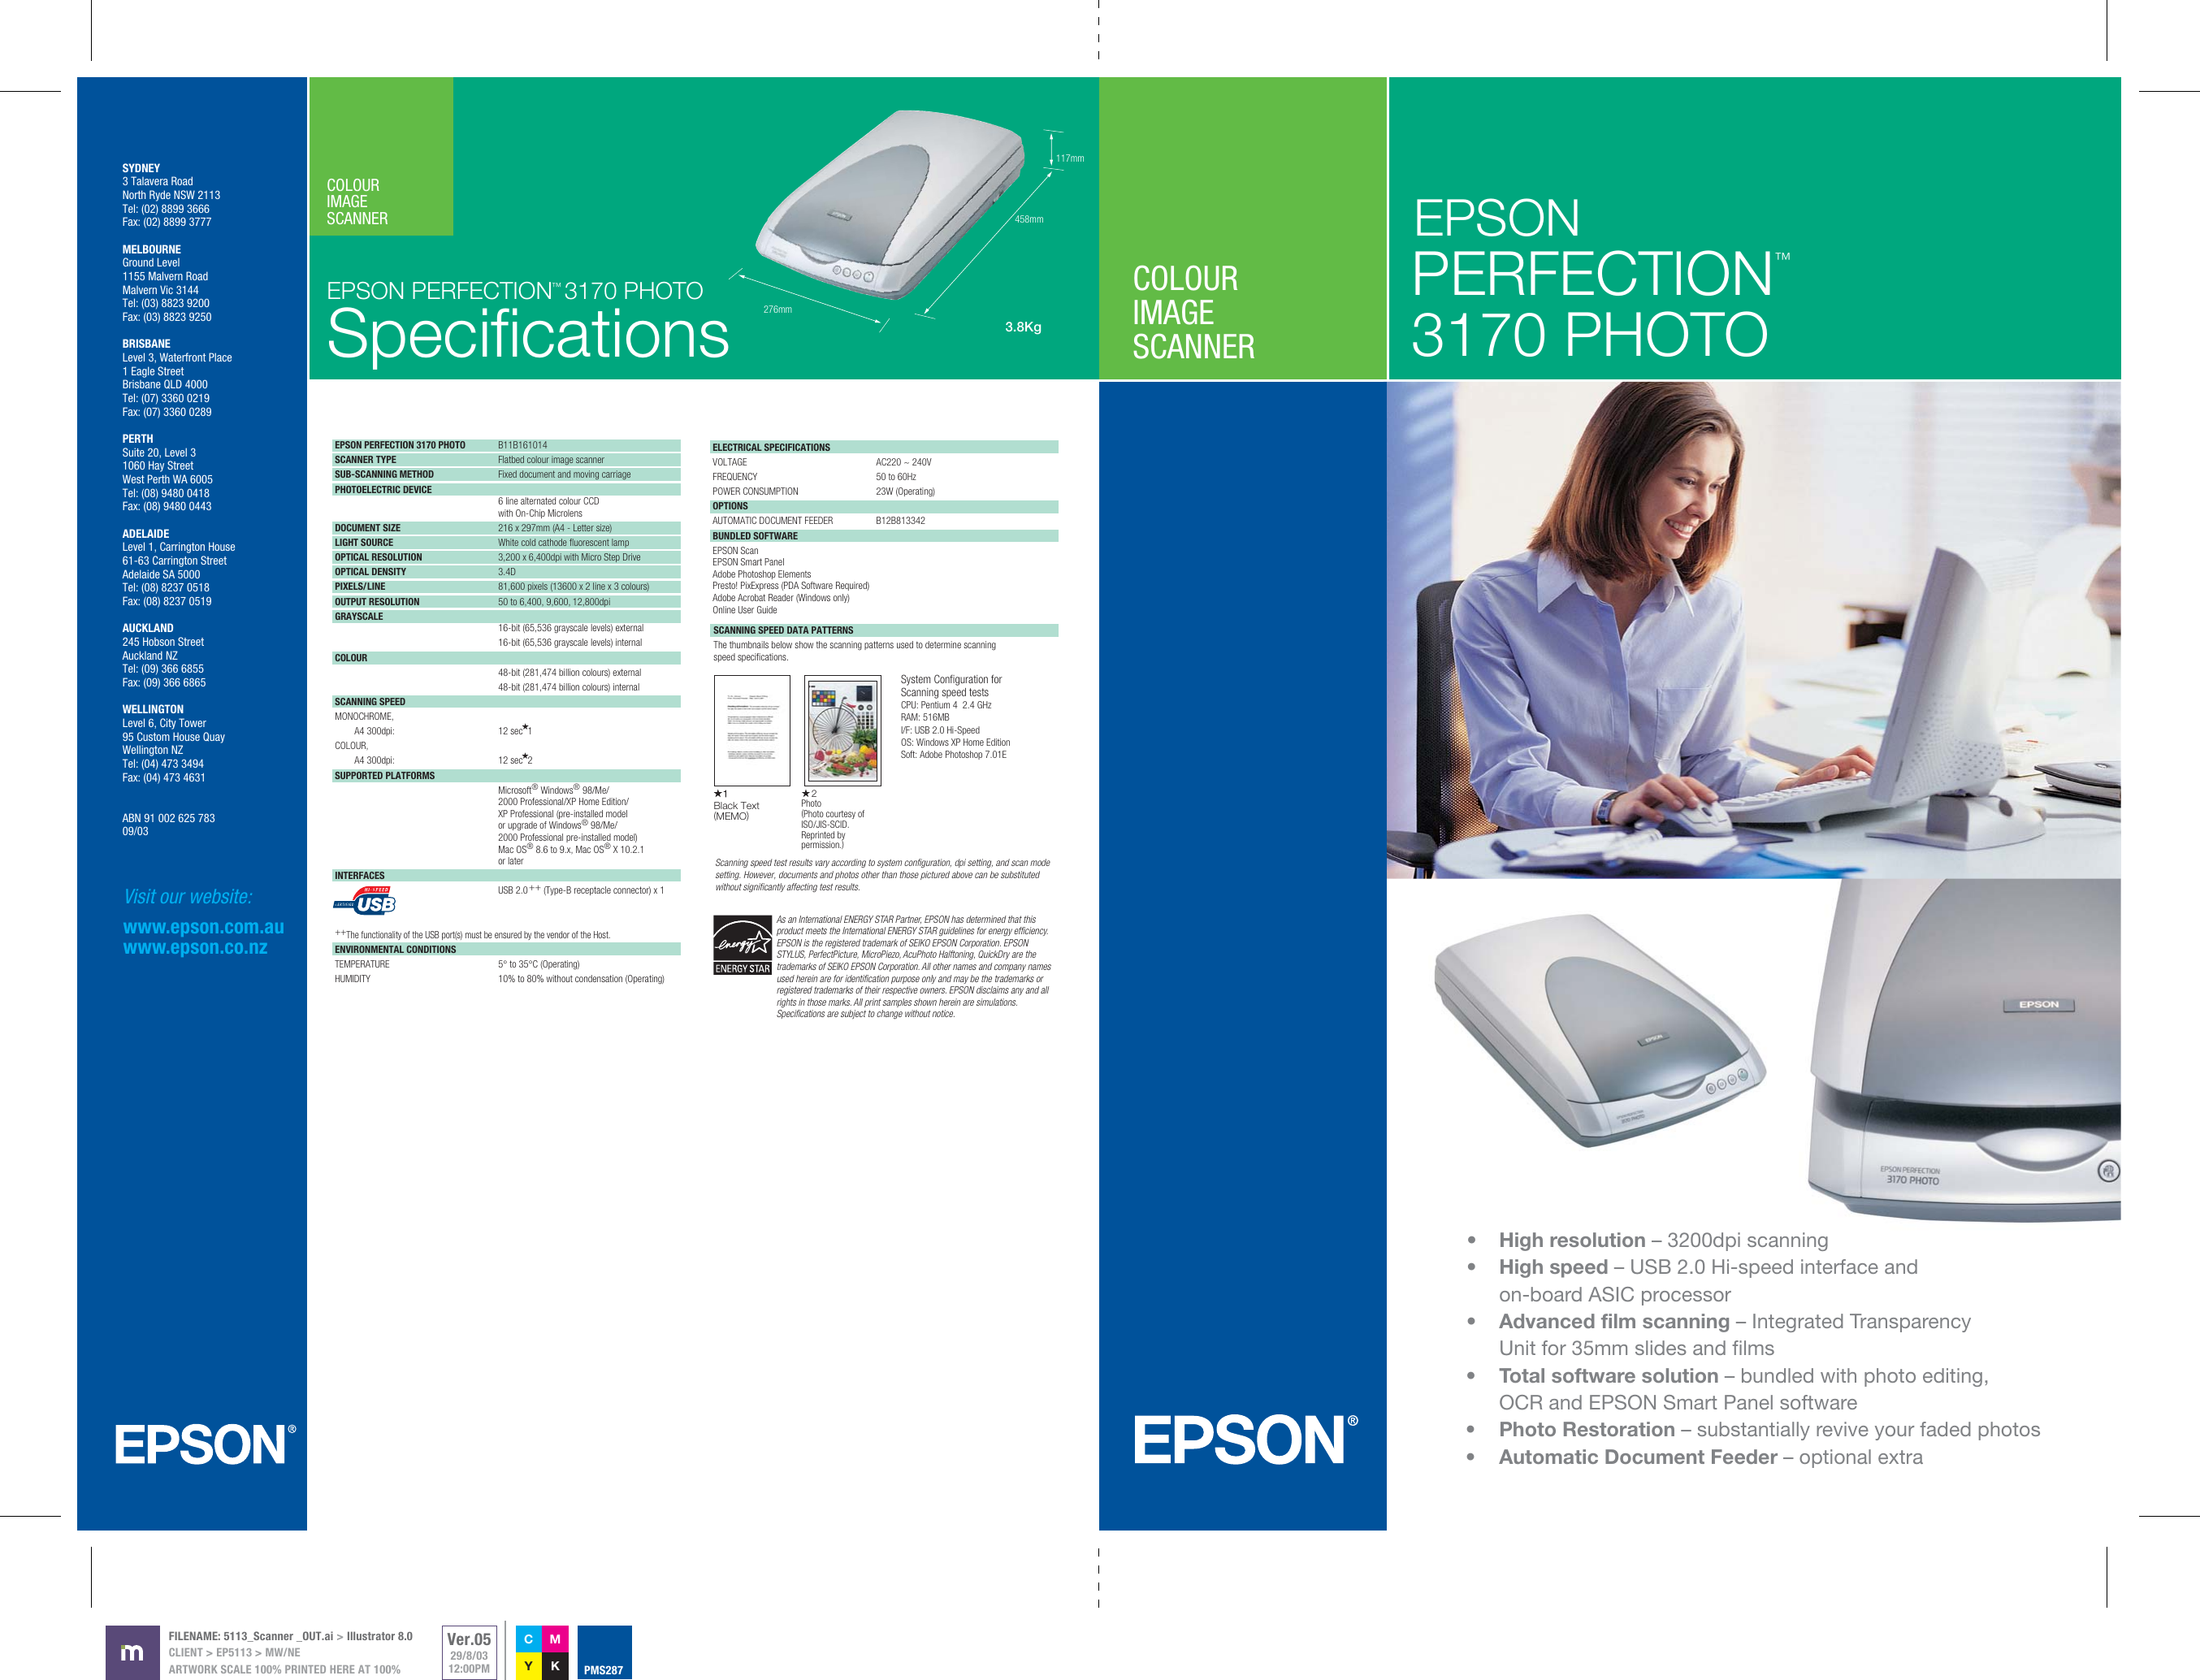 Epson Perfection 3170 Photo Users Manual Ep5113 3170scannerout 7810